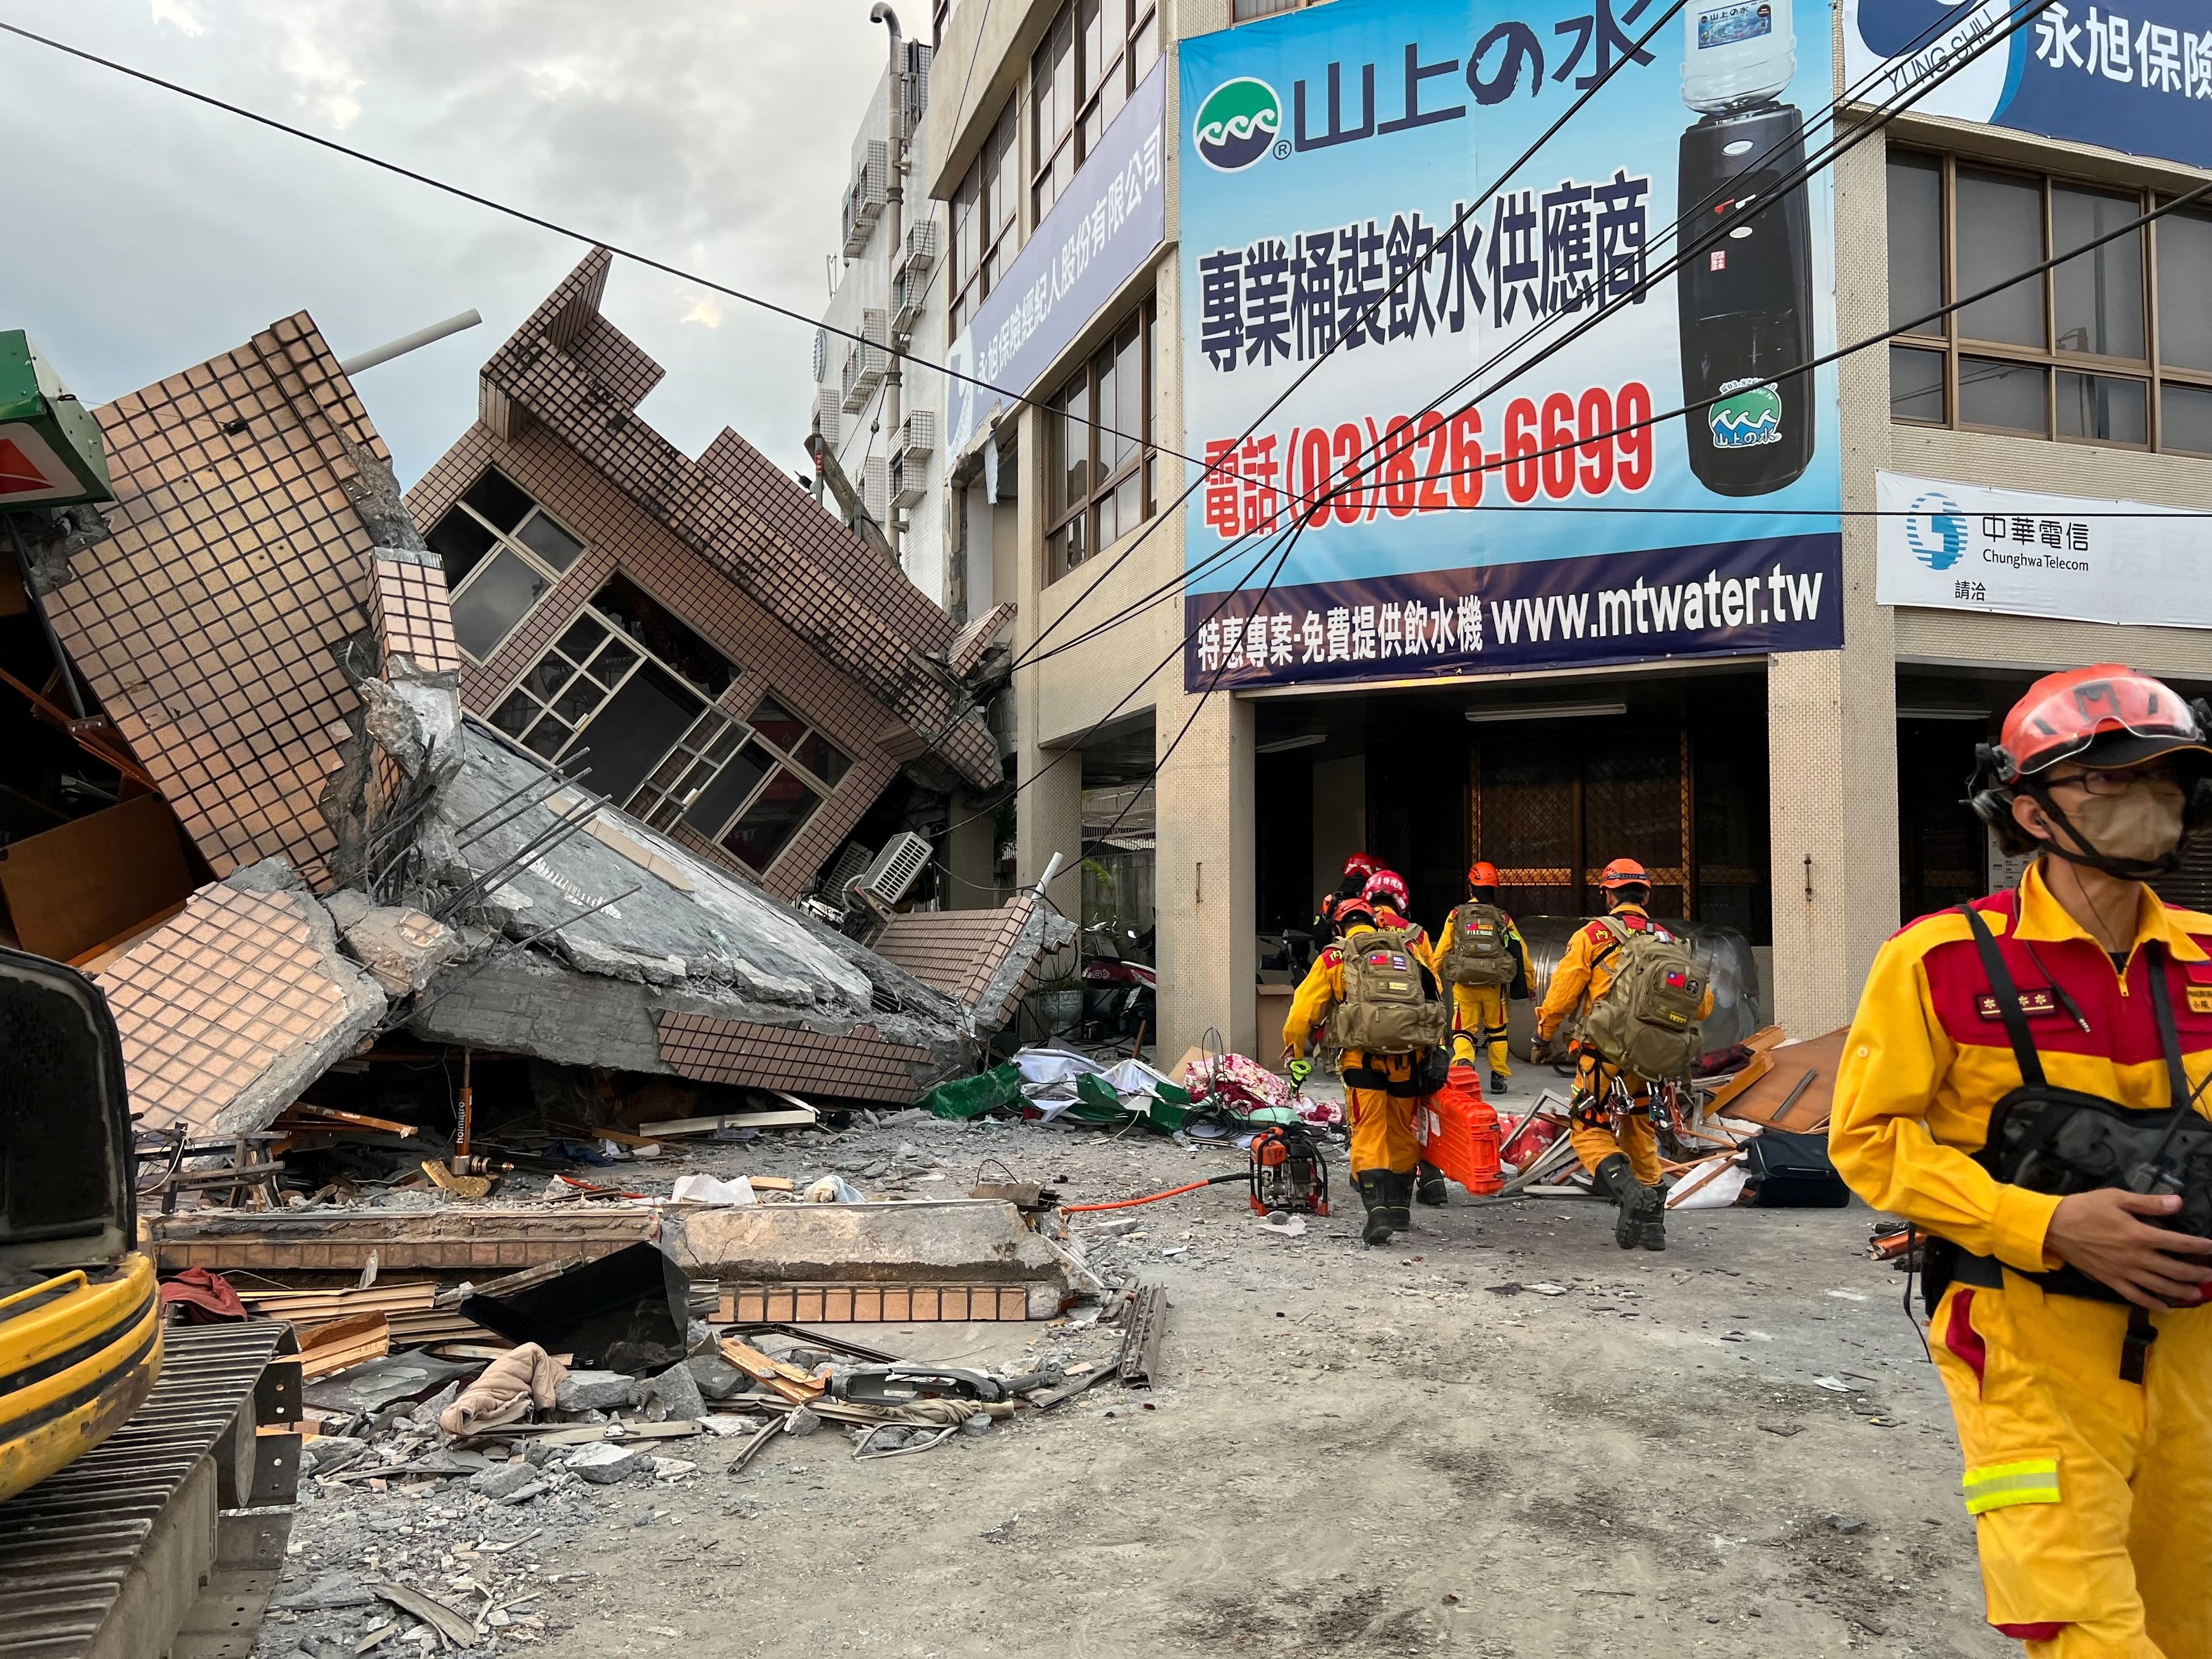 6.8 Magnitude Earthquake Hits Southeastern Taiwan, Building Collapses